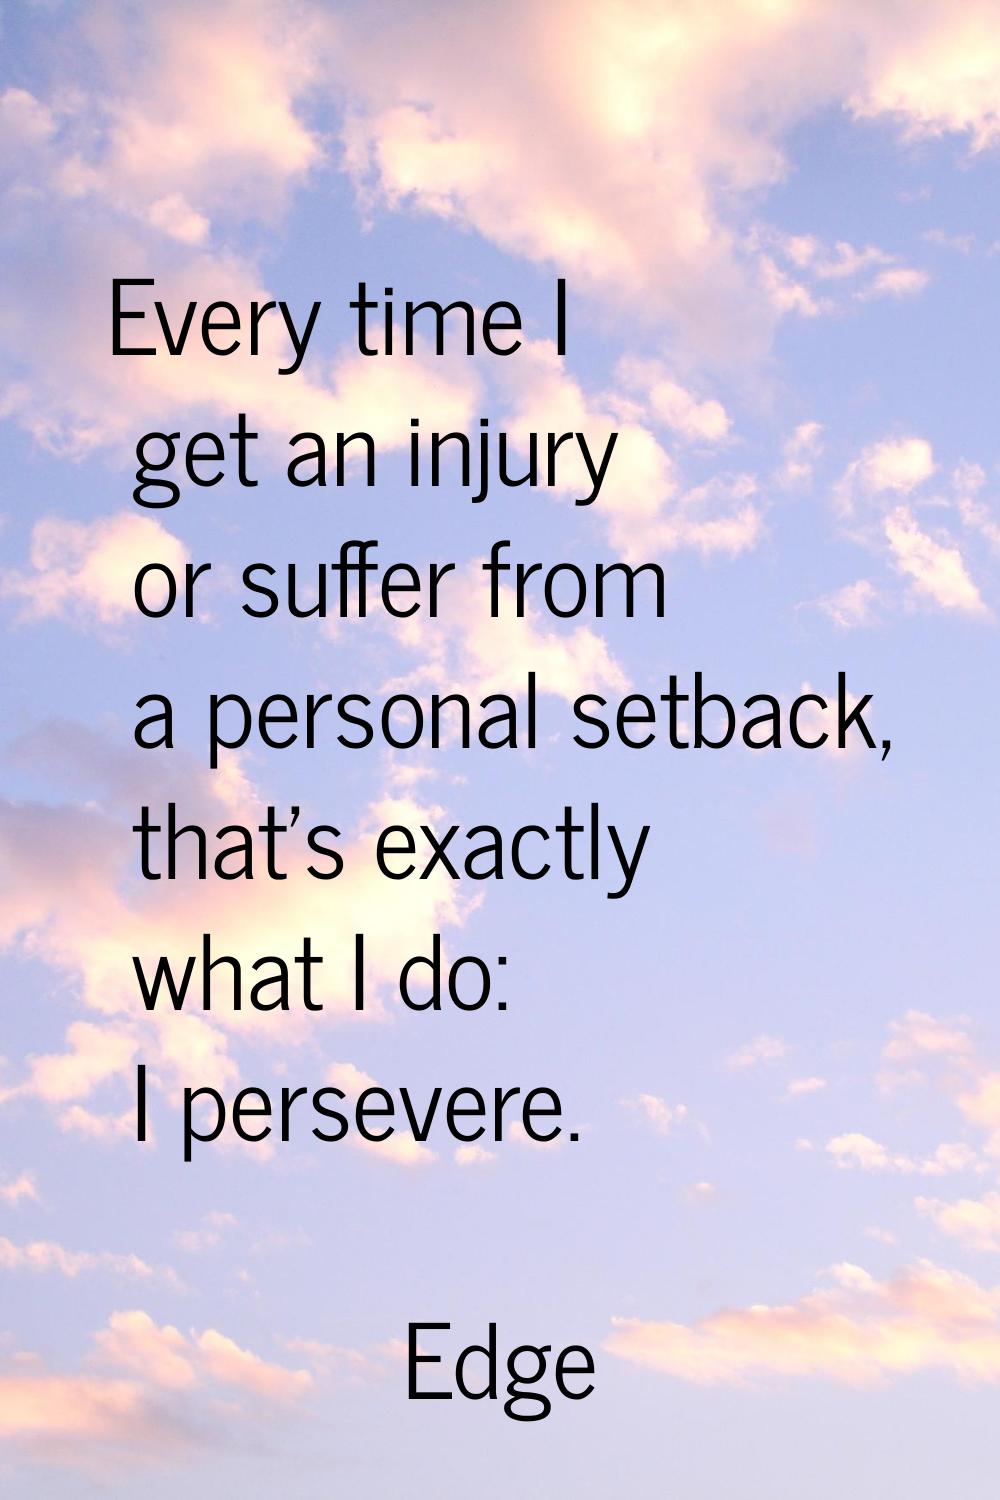 Every time I get an injury or suffer from a personal setback, that's exactly what I do: I persevere